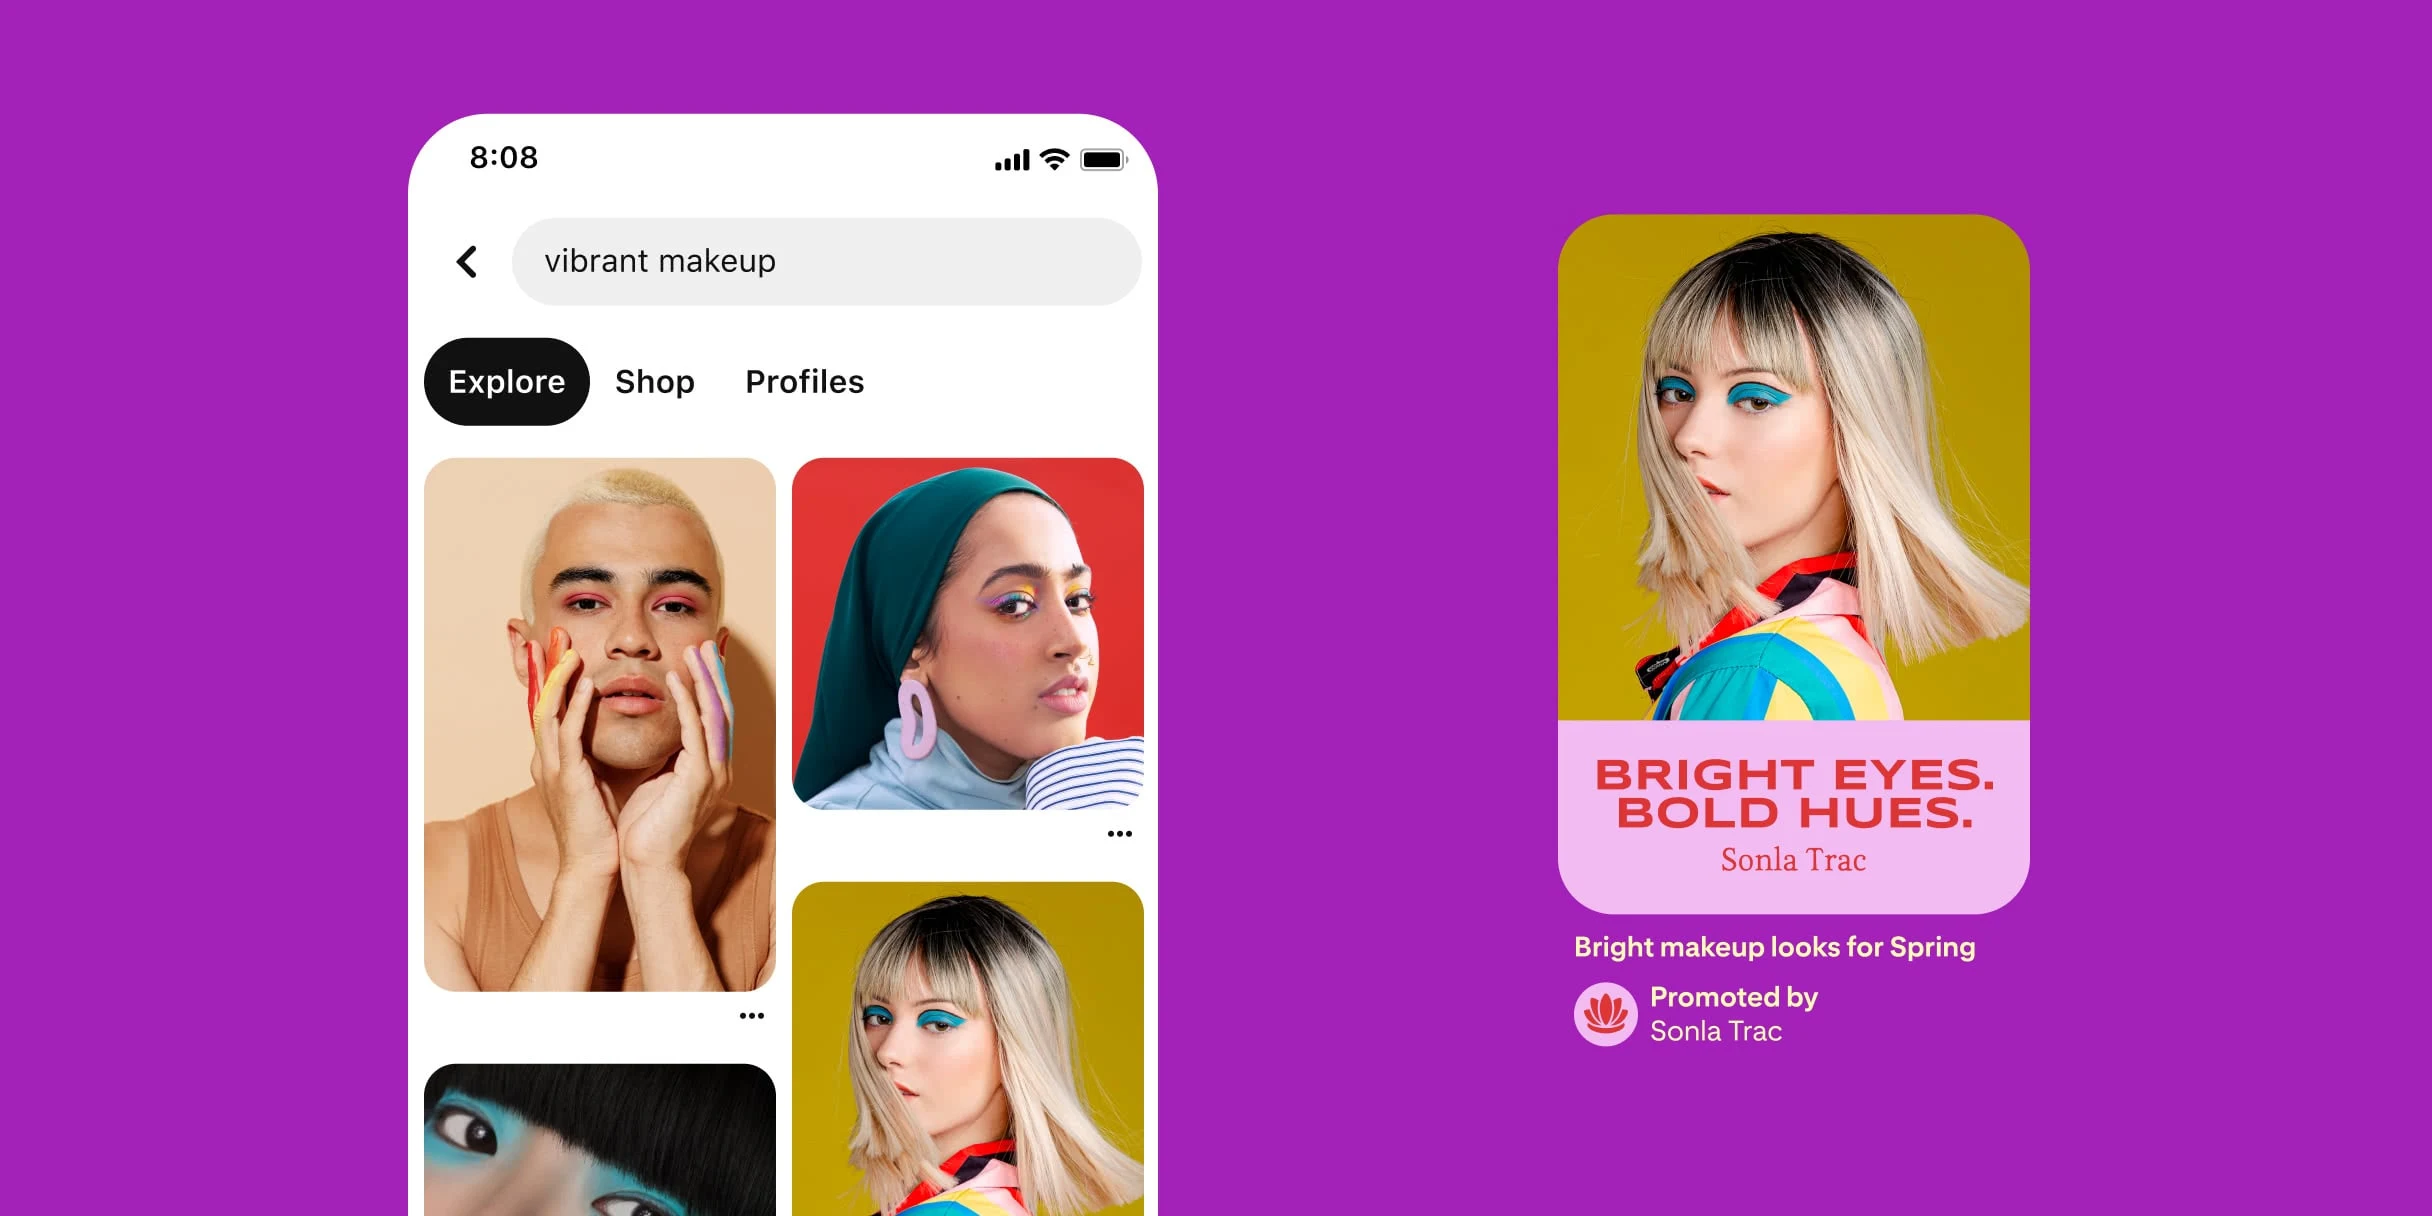 Pinterest search results for vibrant makeup. White man with short blonde hair, pink eyelids. Brown-skinned woman with blue head wrap, rainbow eyelids. East Asian woman with misty blue eyelids. Pin of white woman with long blonde hair, bright blue eyelids on a yellow background. Text on pink background that reads bright eyes, bold hues. Description is bright makeup looks for spring.